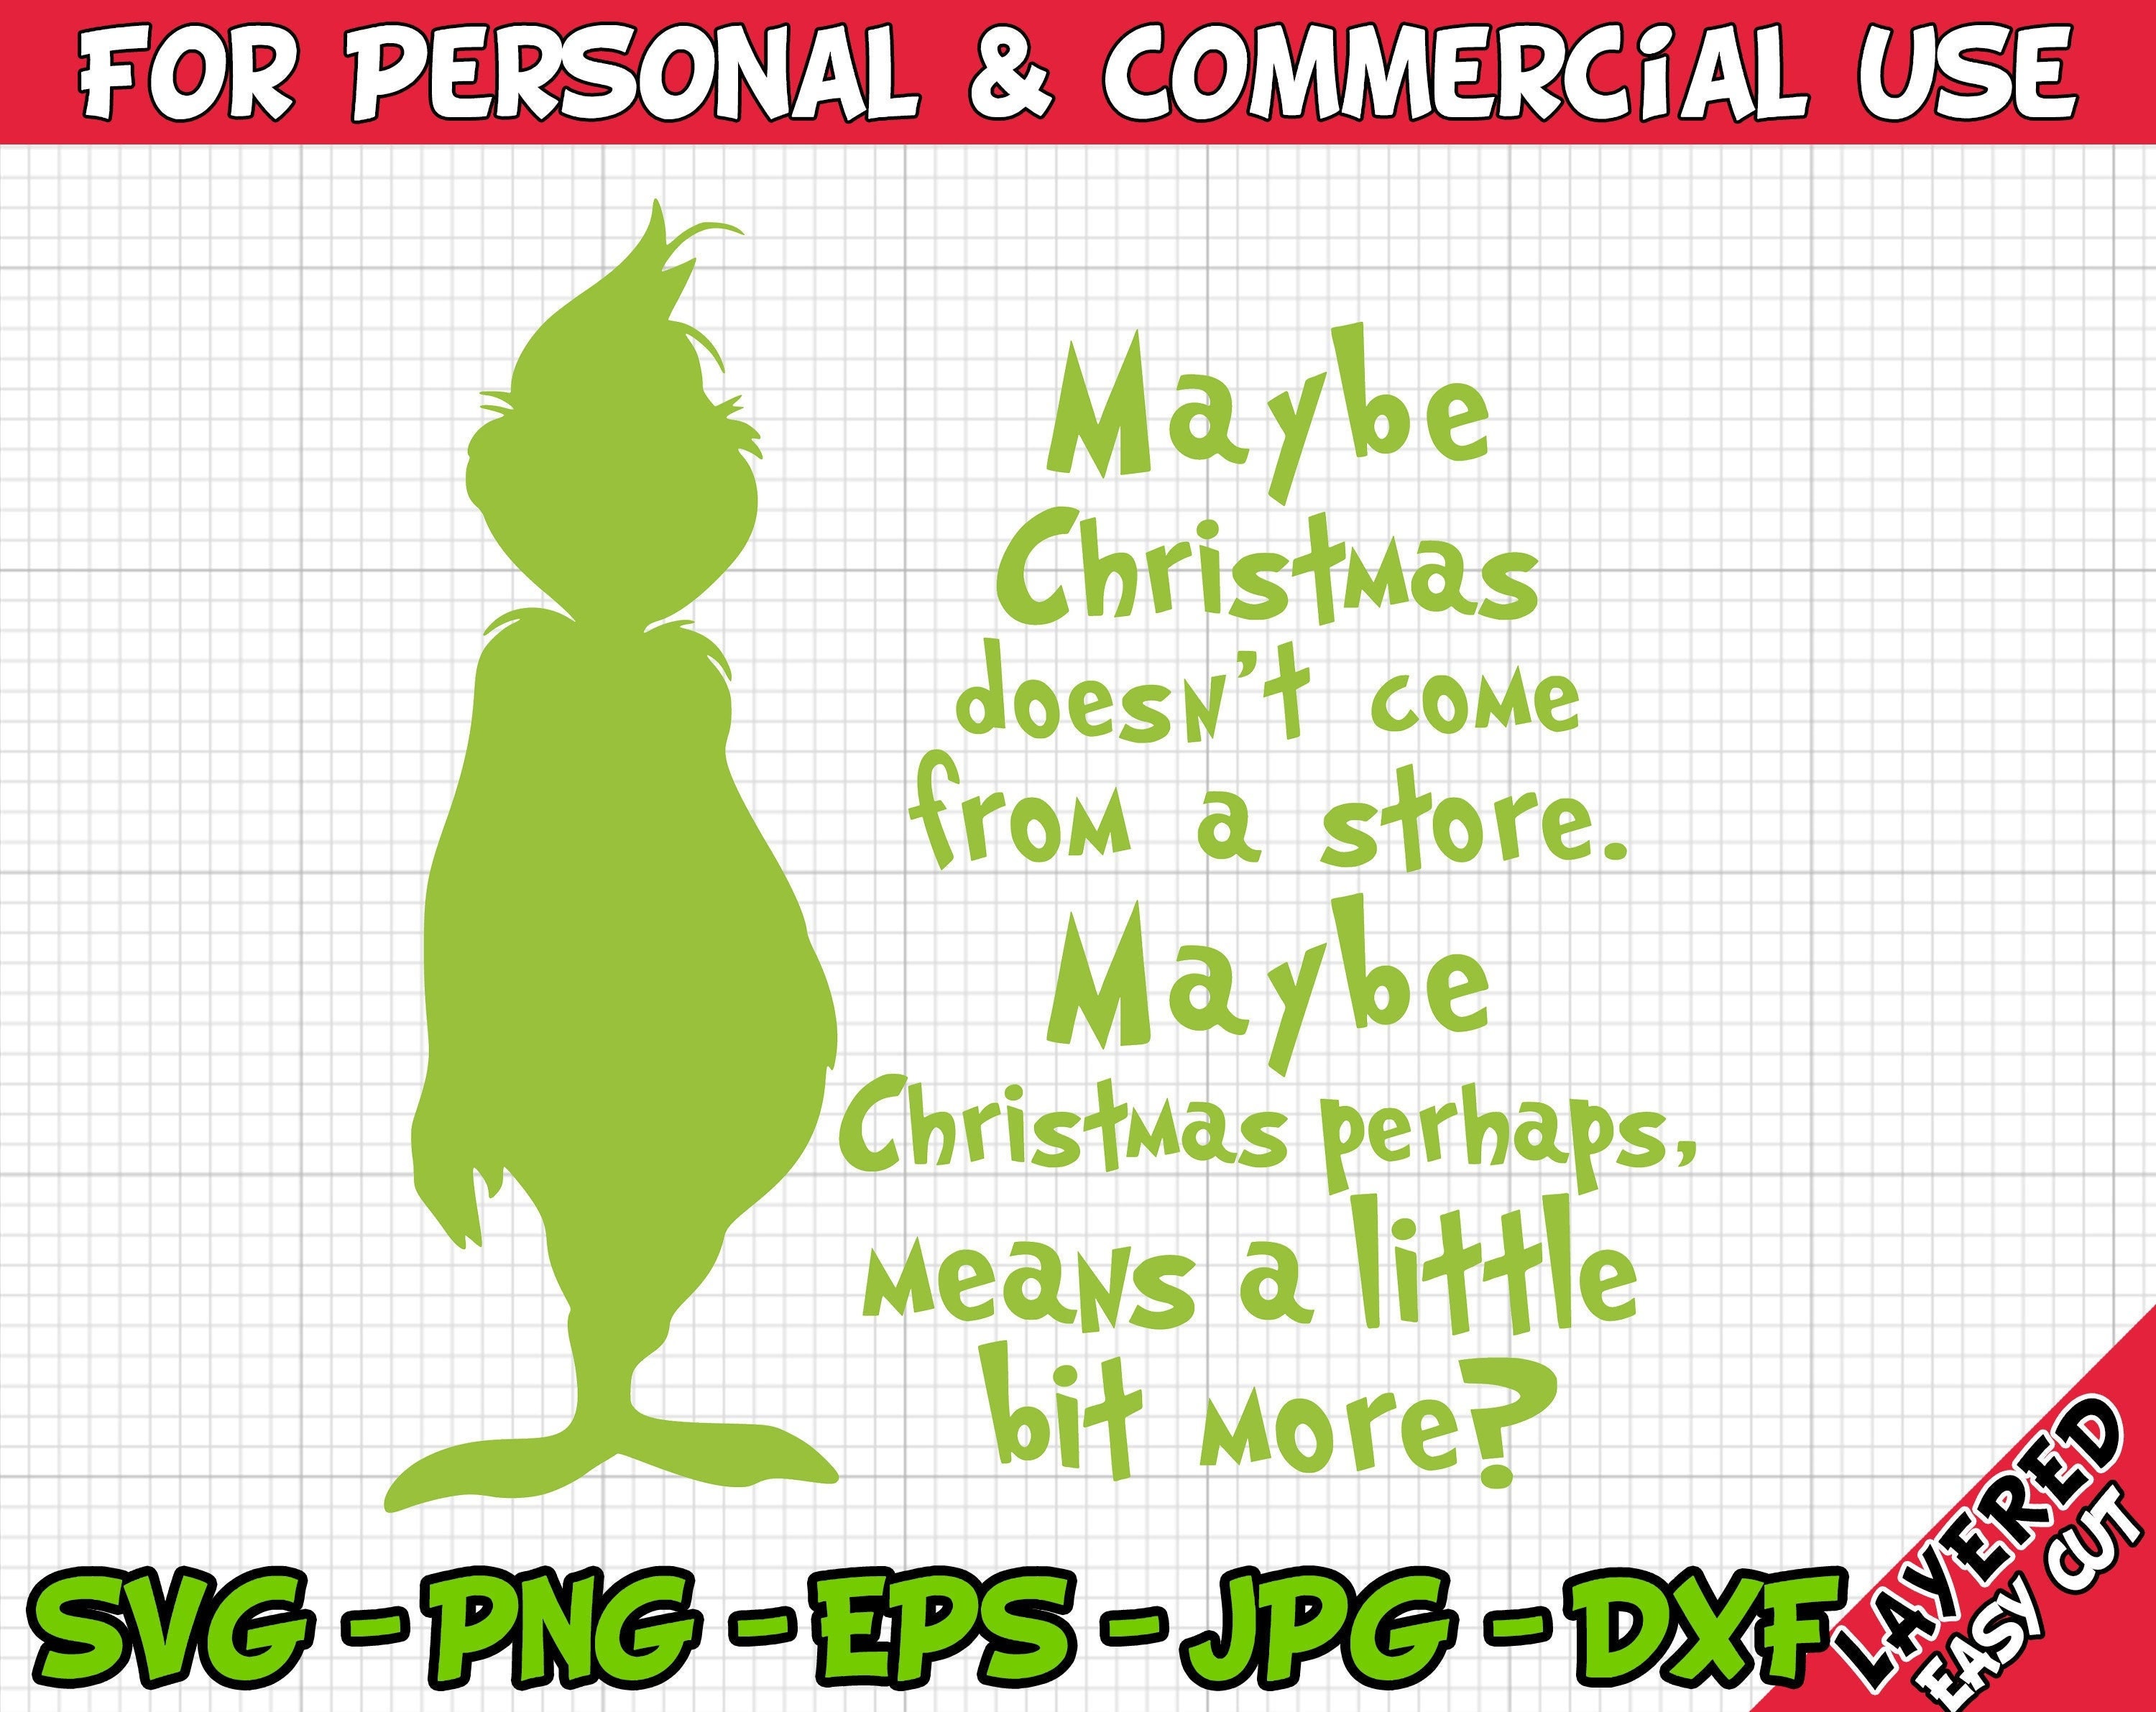 Maybe Christmas Means a Little Bit More Grinch Tumbler - iTeeUS